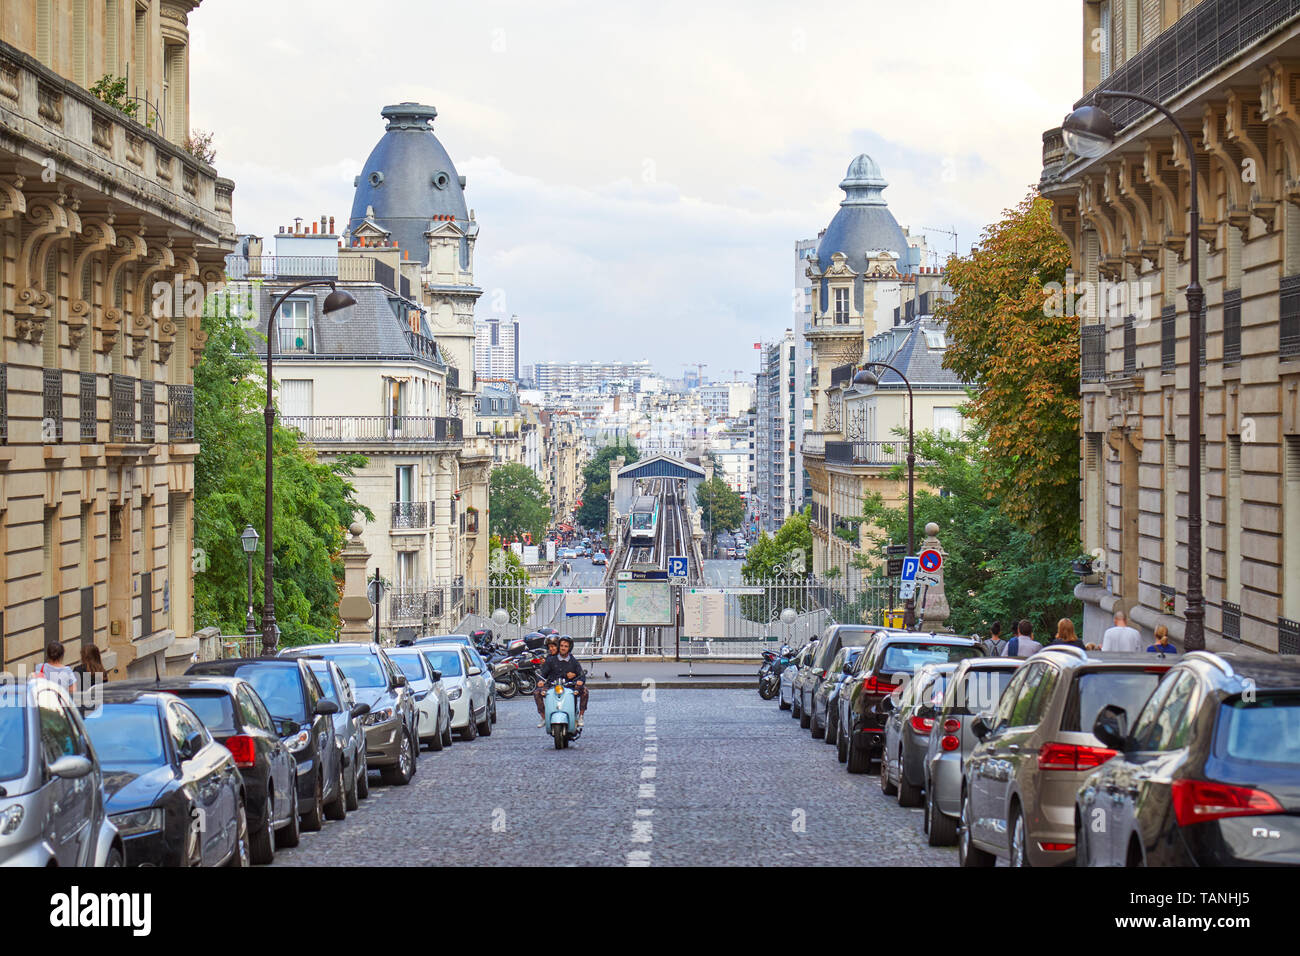 PARIS, FRANCE - JULY 22, 2017: Street in Paris with perspective, people walking and riding moped in France Stock Photo